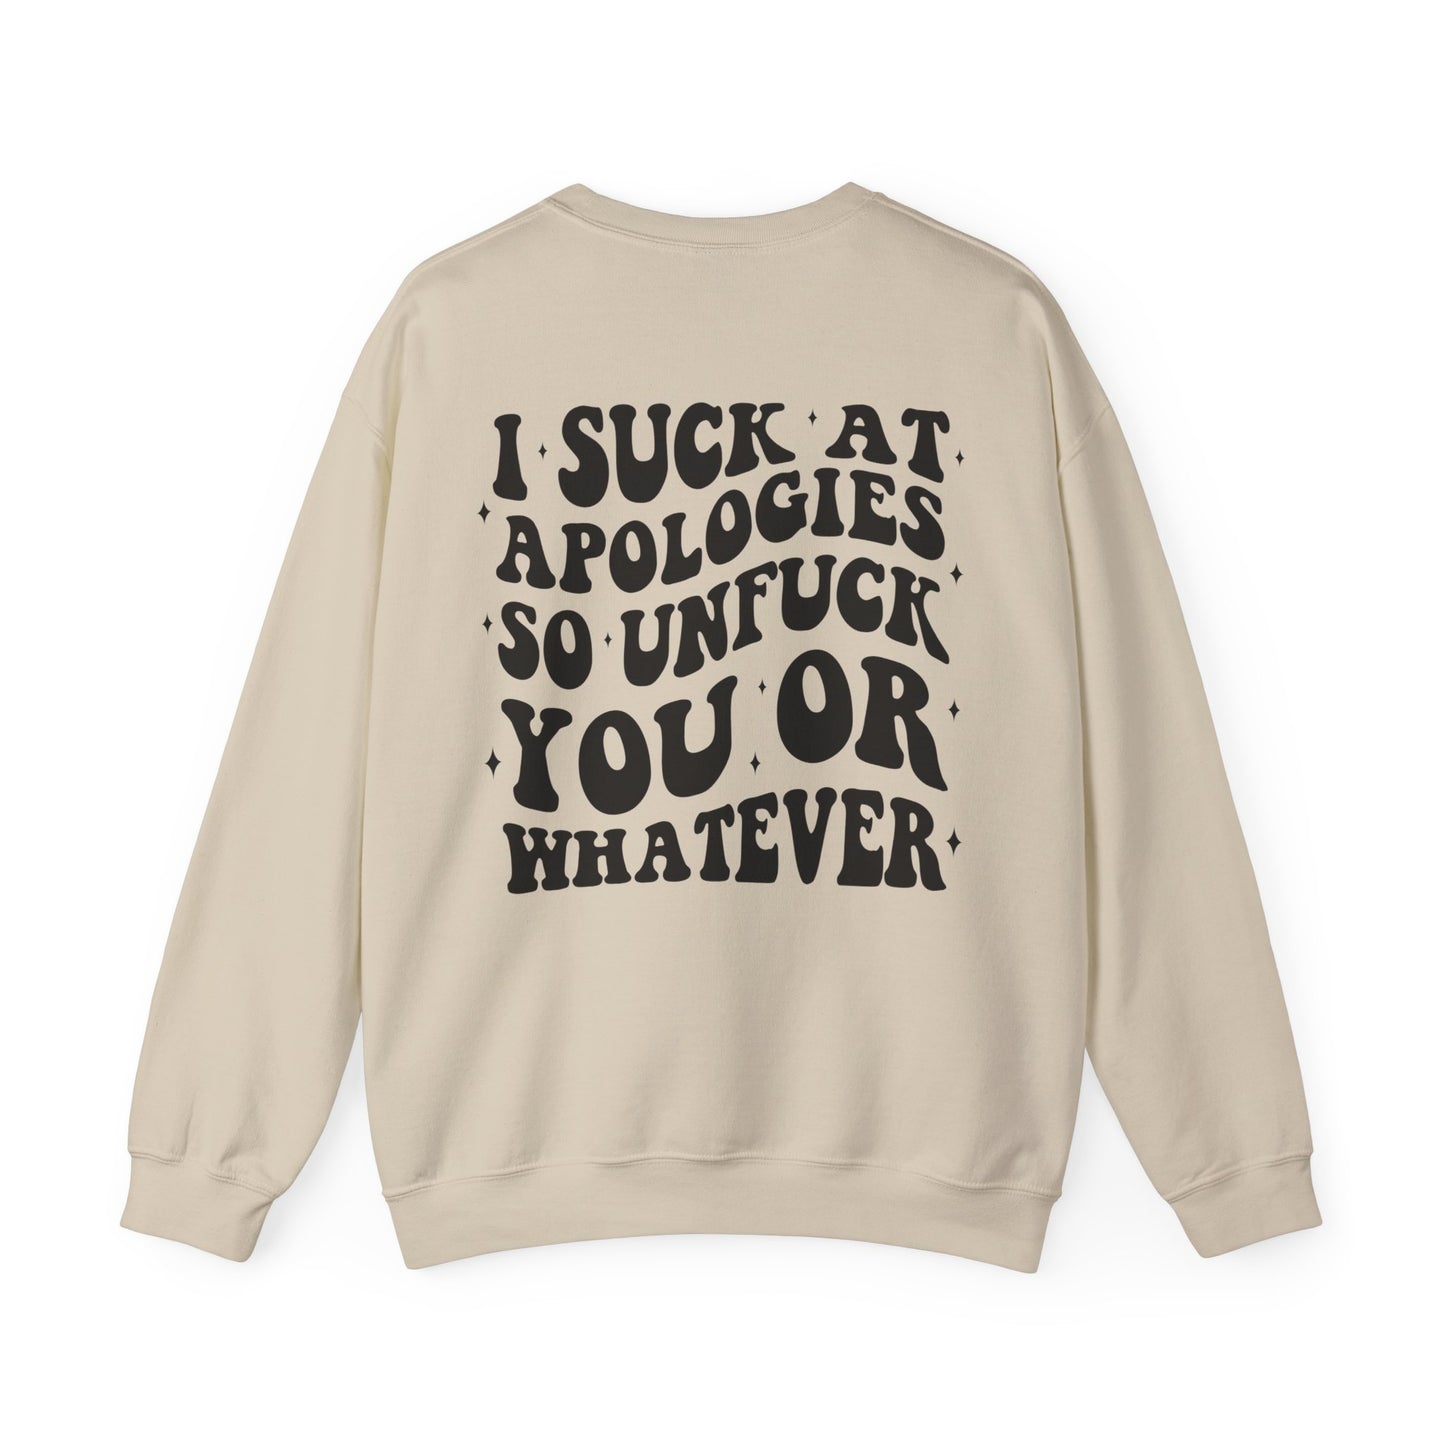 "I Suck At Apologies So Unf#ck You Or Whatever" Unisex Heavy Blend™ Crewneck Sweatshirt